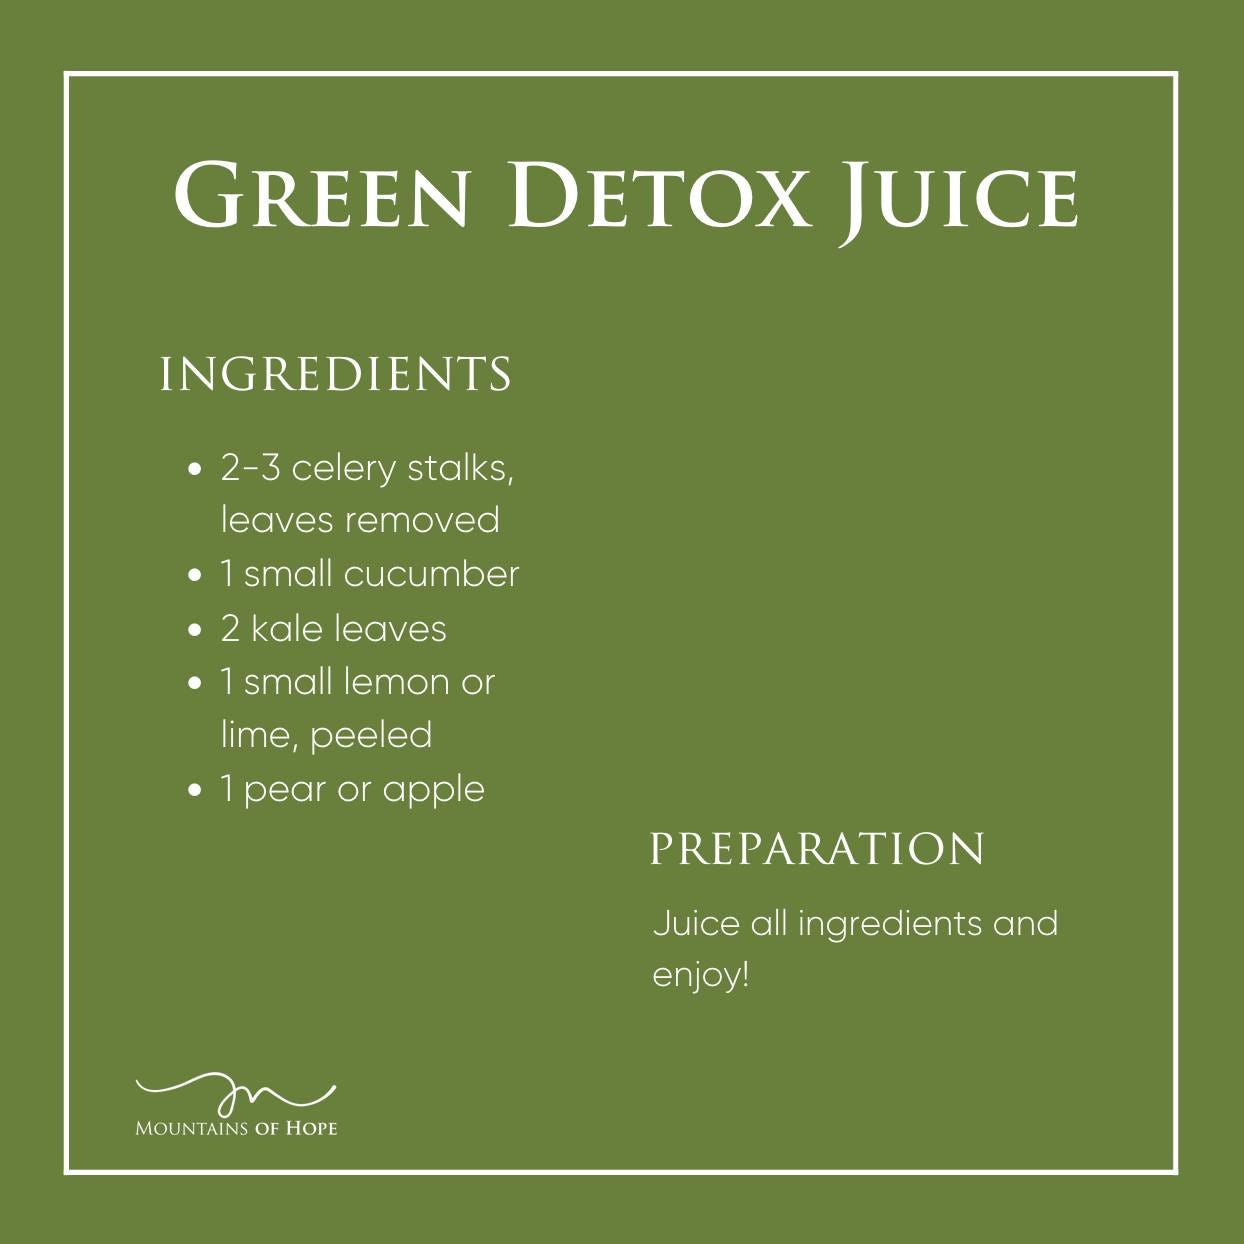 May be an image of algae and text that says 'GREEN DETOX JUICE INGREDIENTS .2-3 celery stalks, leaves removed small cucumber kale leaves small lemon or lime, peeled pear or apple PREPARATION Juice all ingredients and enjoy! MOUNTAINS OF HOPE'